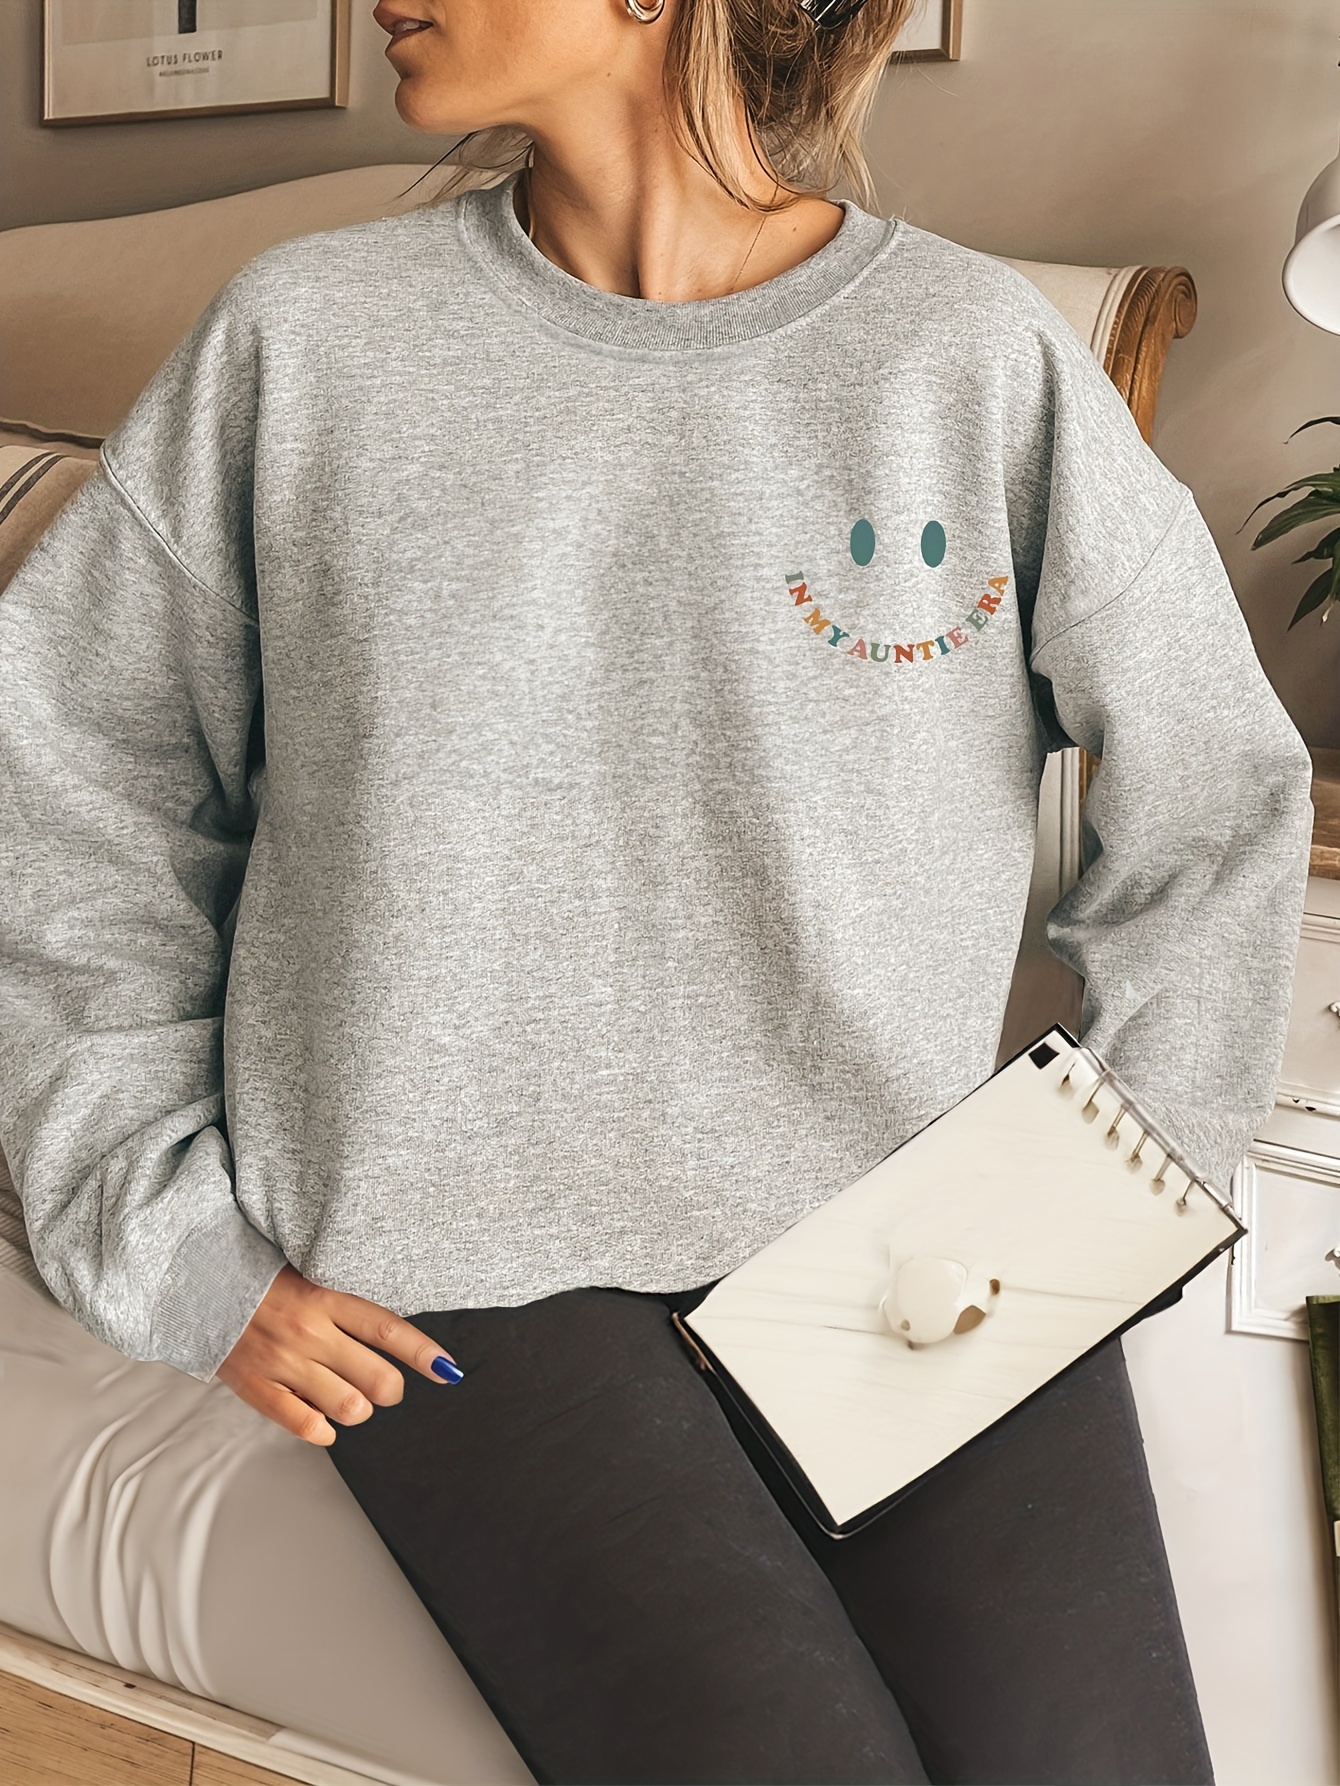 letter print pullover sweatshirt casual long sleeve crew neck sweatshirt for fall winter womens clothing details 1